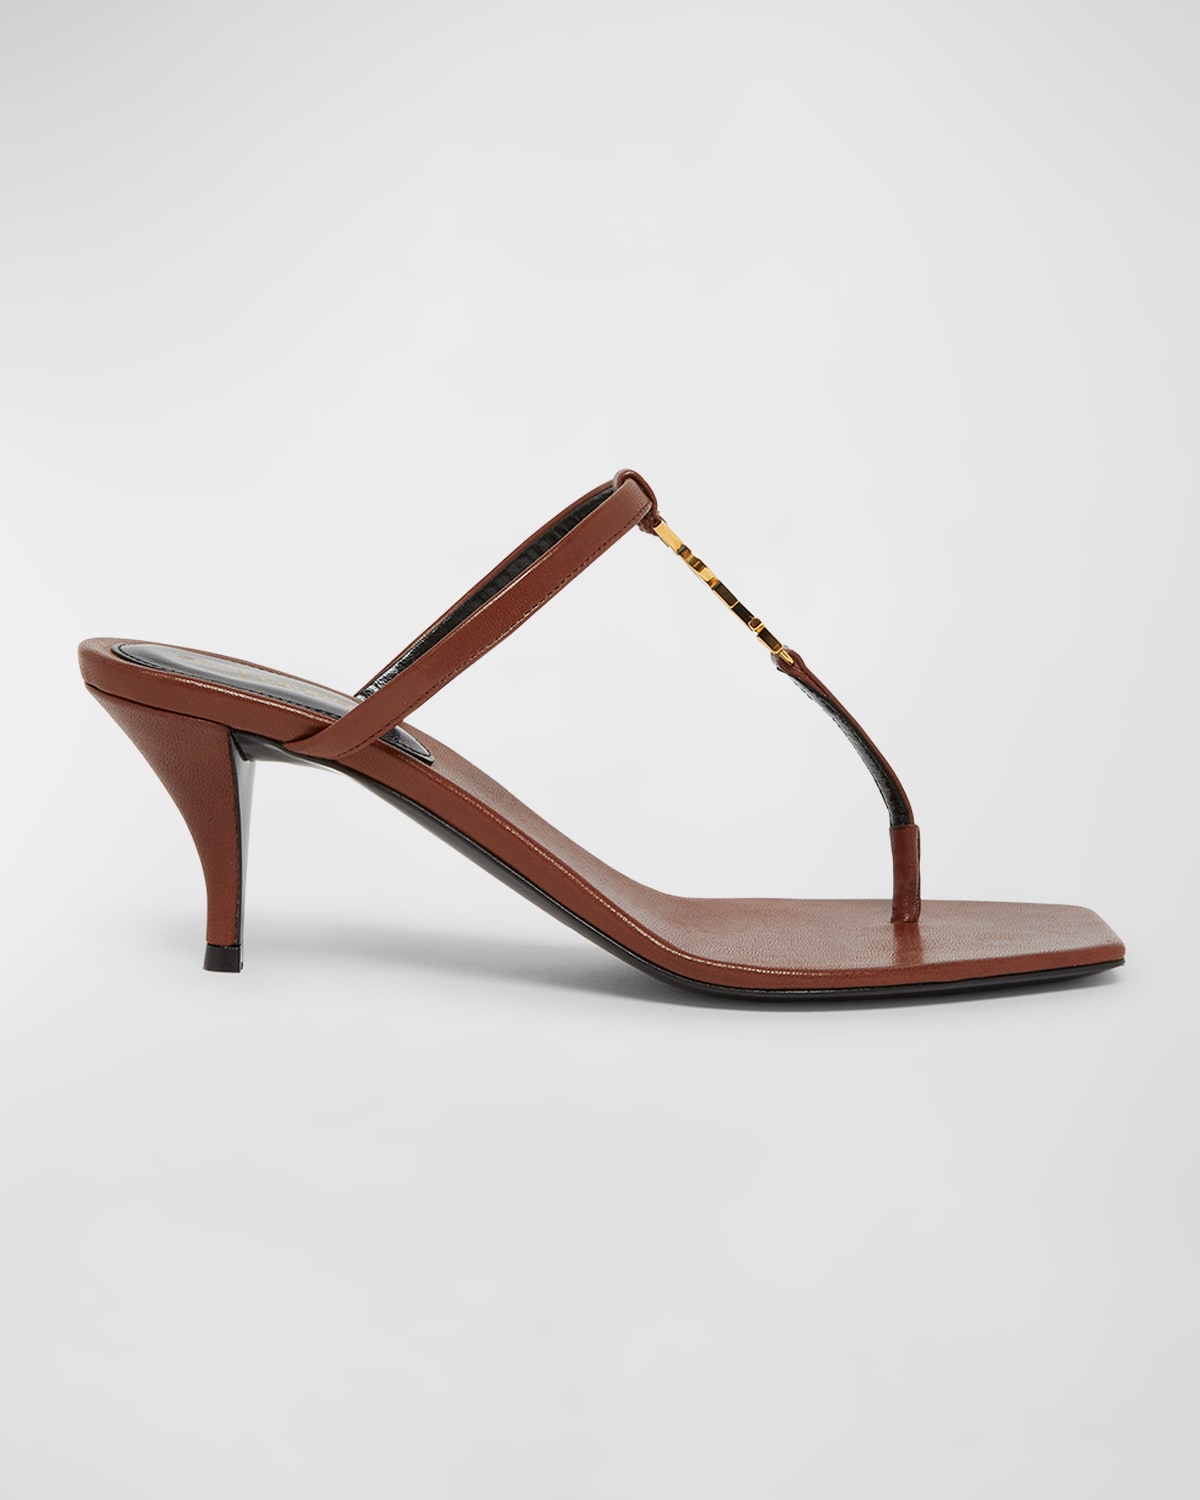 Cassandra Leather YSL Thong Mule Sandals